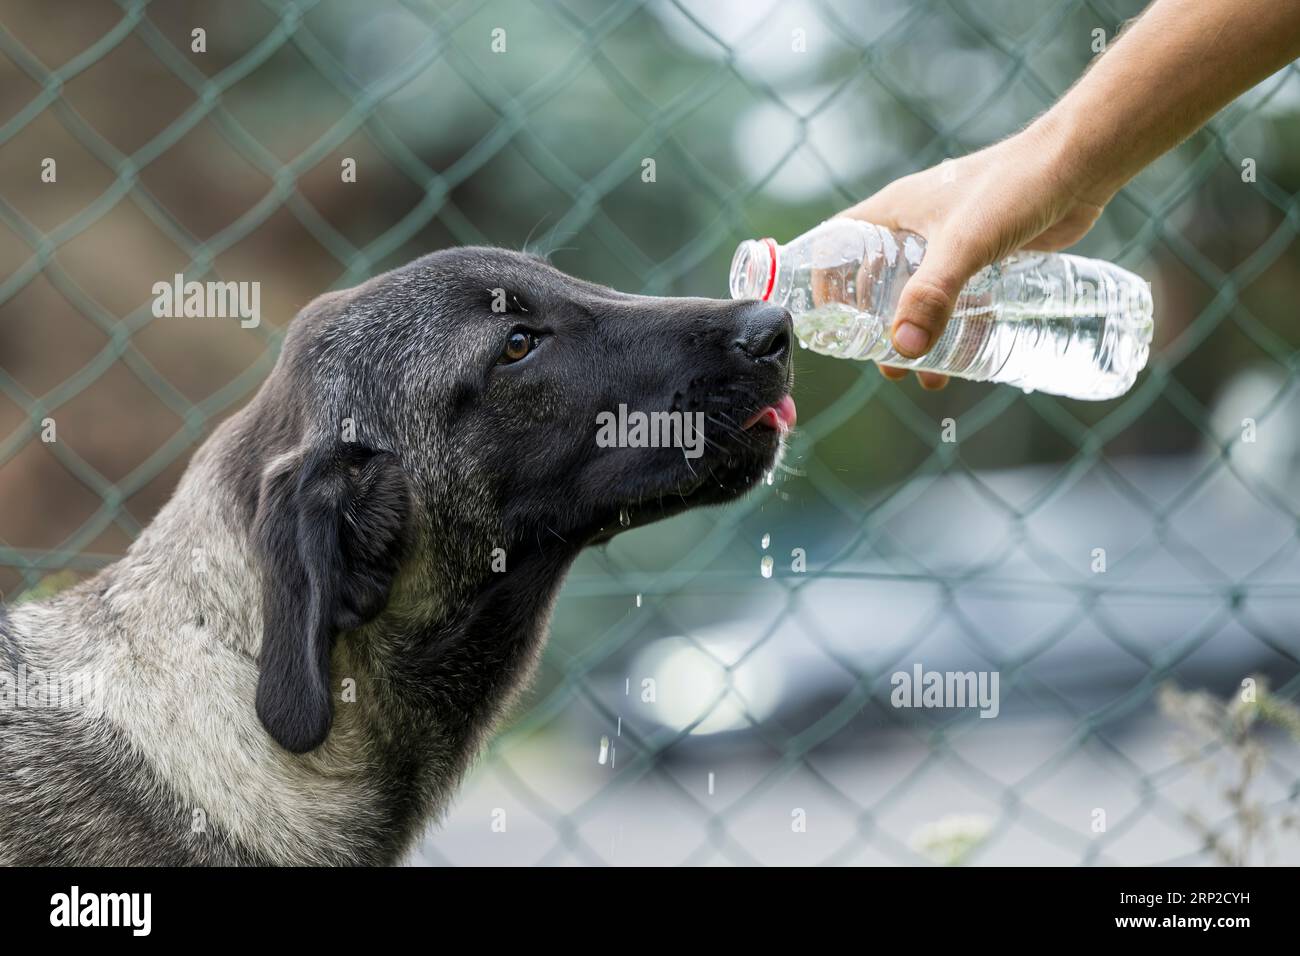 A Turkish shepherd dog drinks water from a bottle. Stock Photo